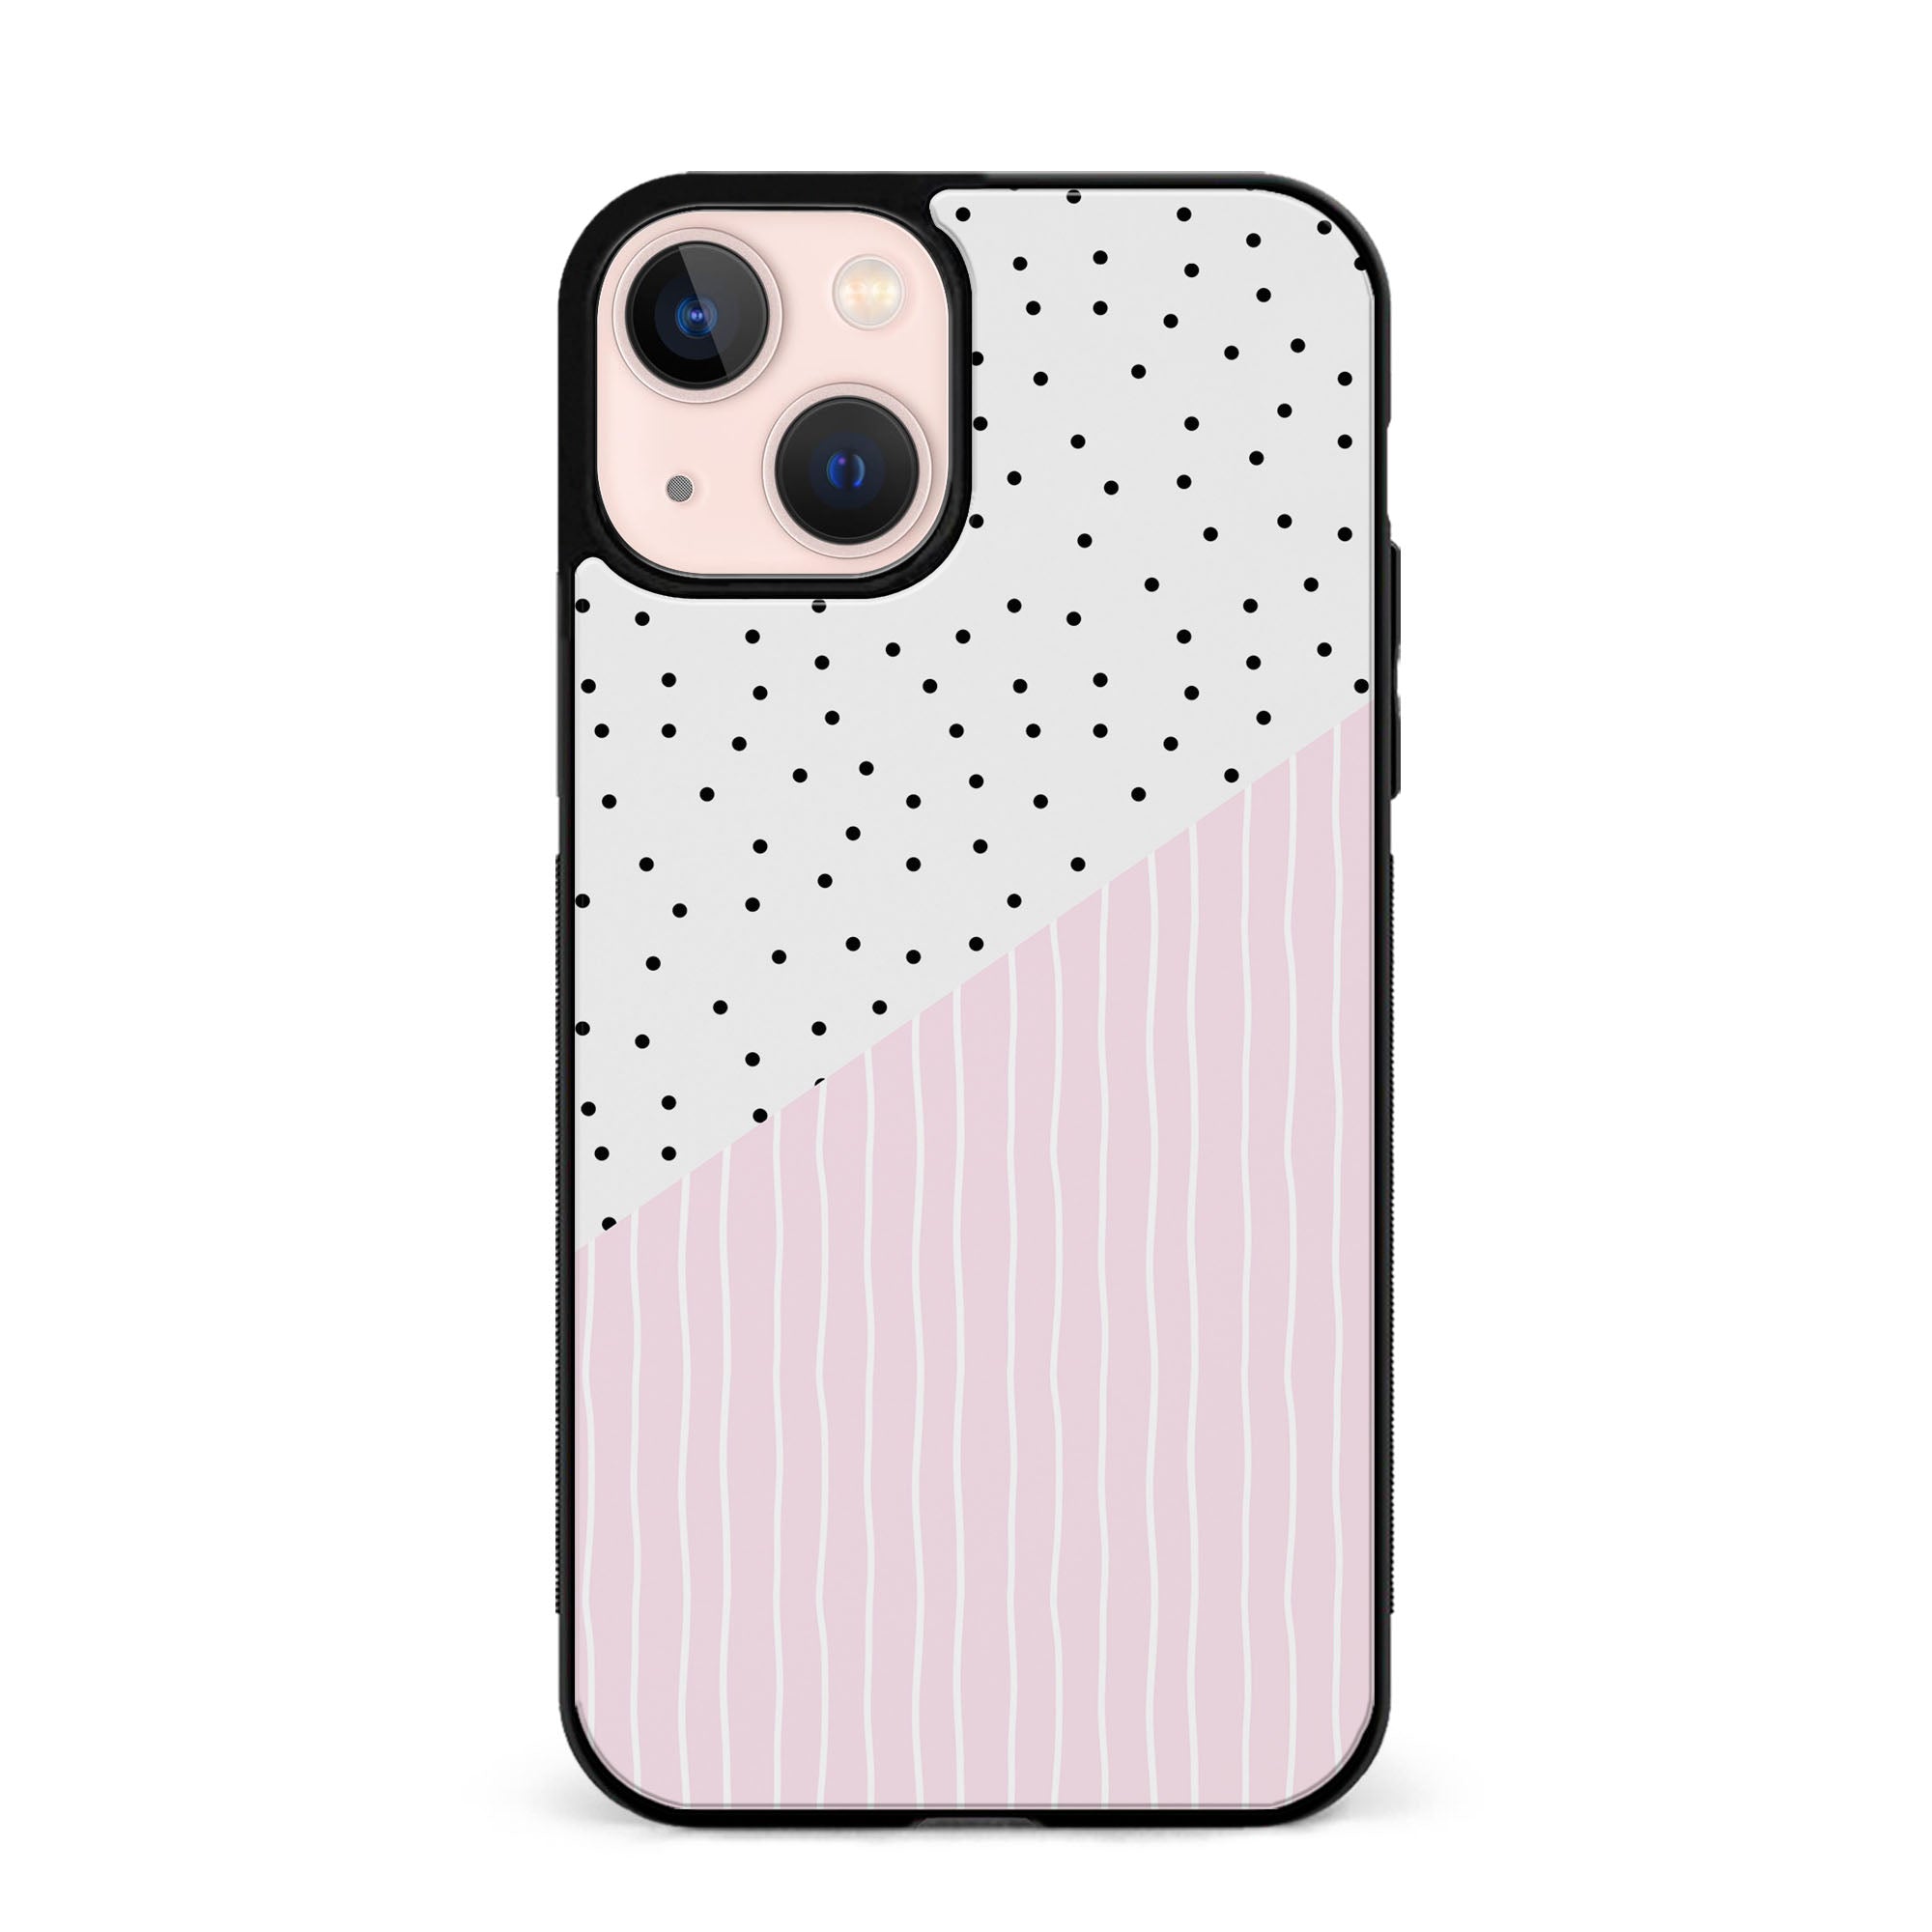 Pastel Pink & Spots Rubber Phone Case for iPhone, Samsung, Huawei & Pixel